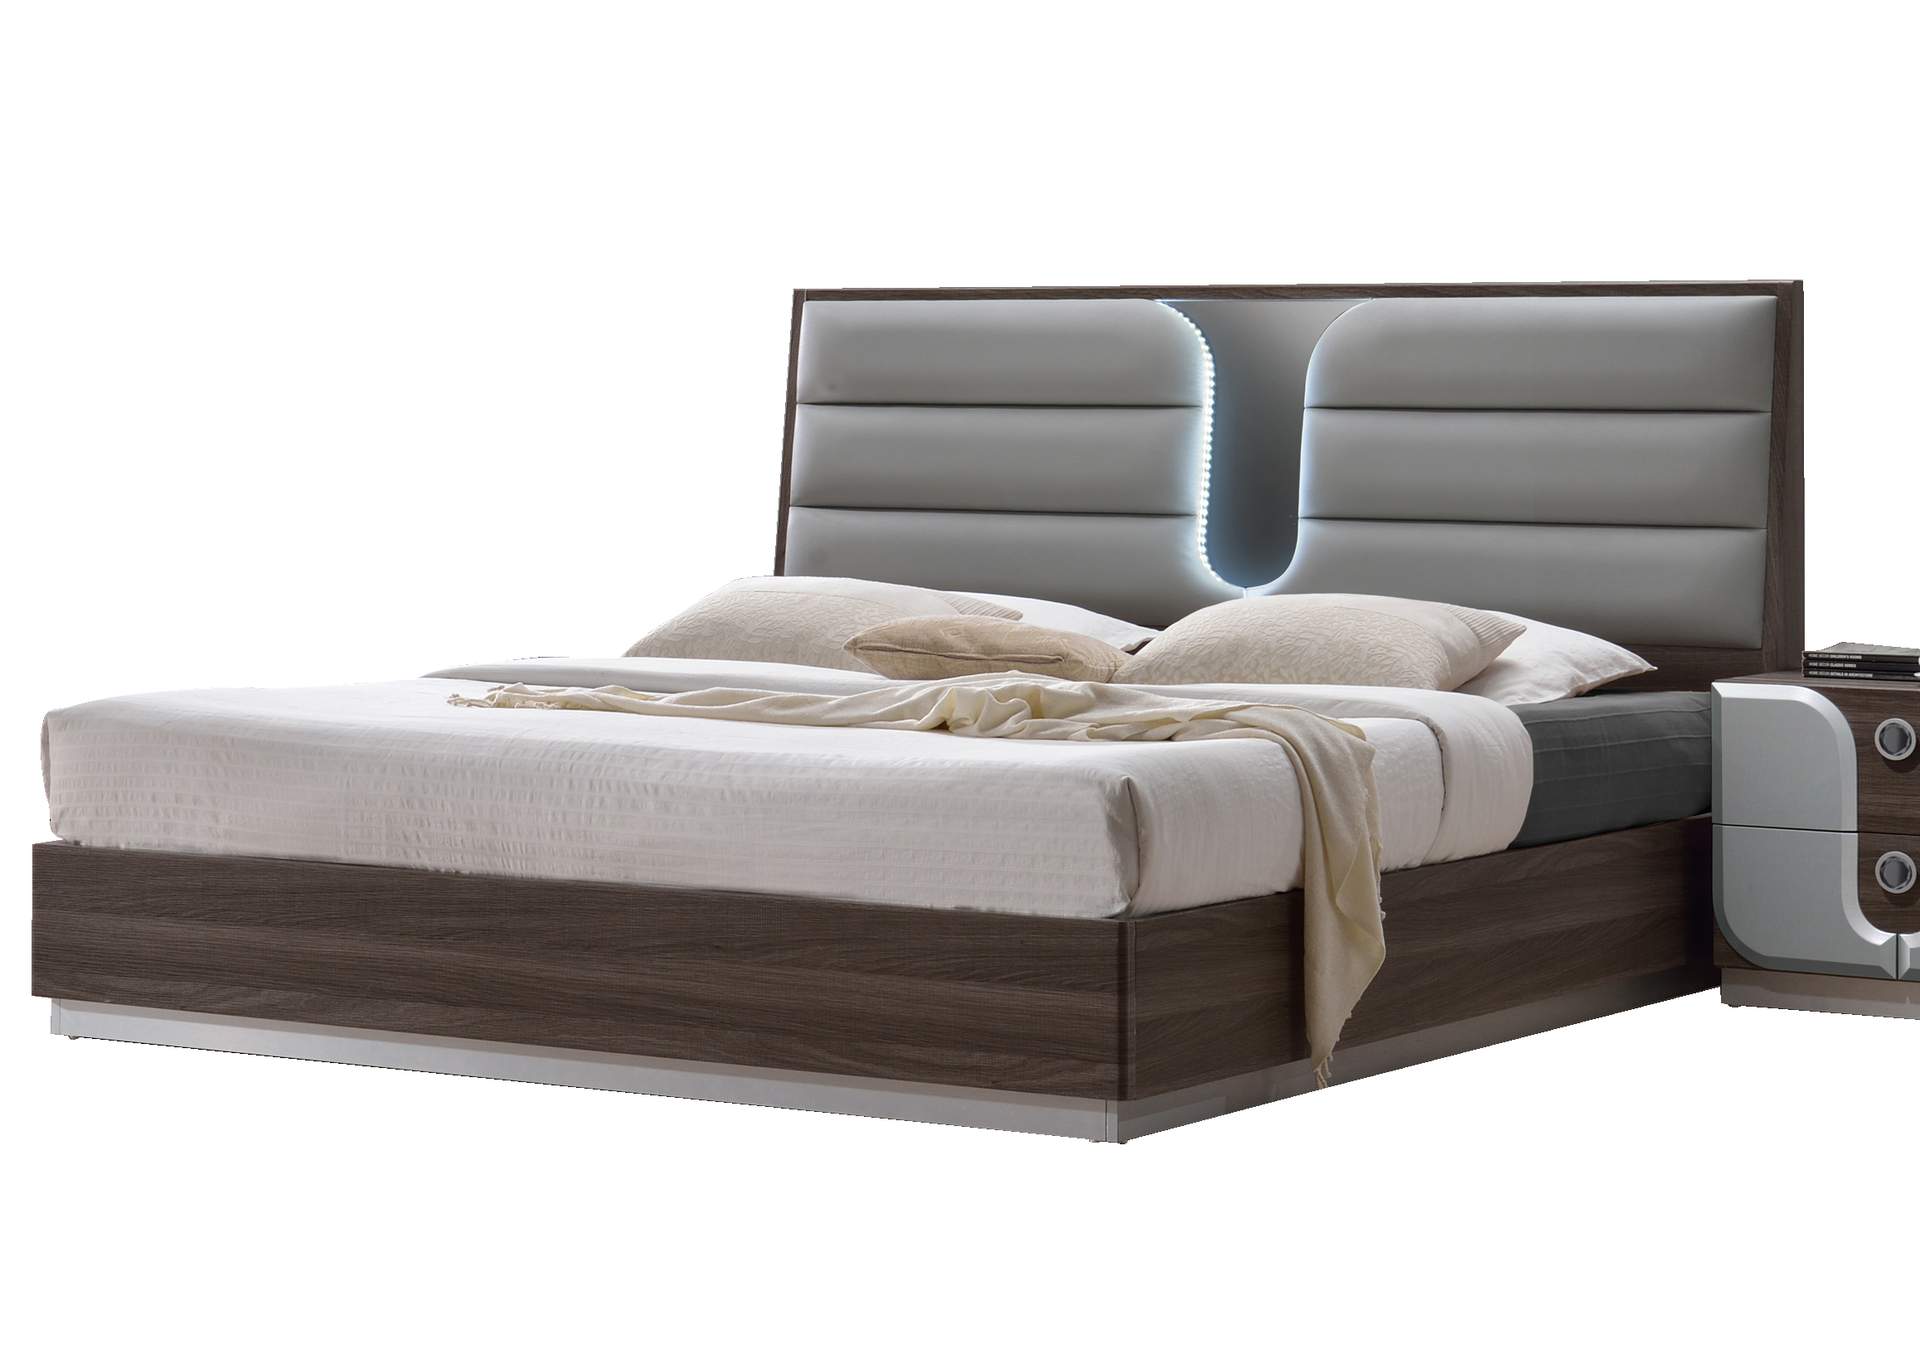 Modern Queen Size Bed,Chintaly Imports